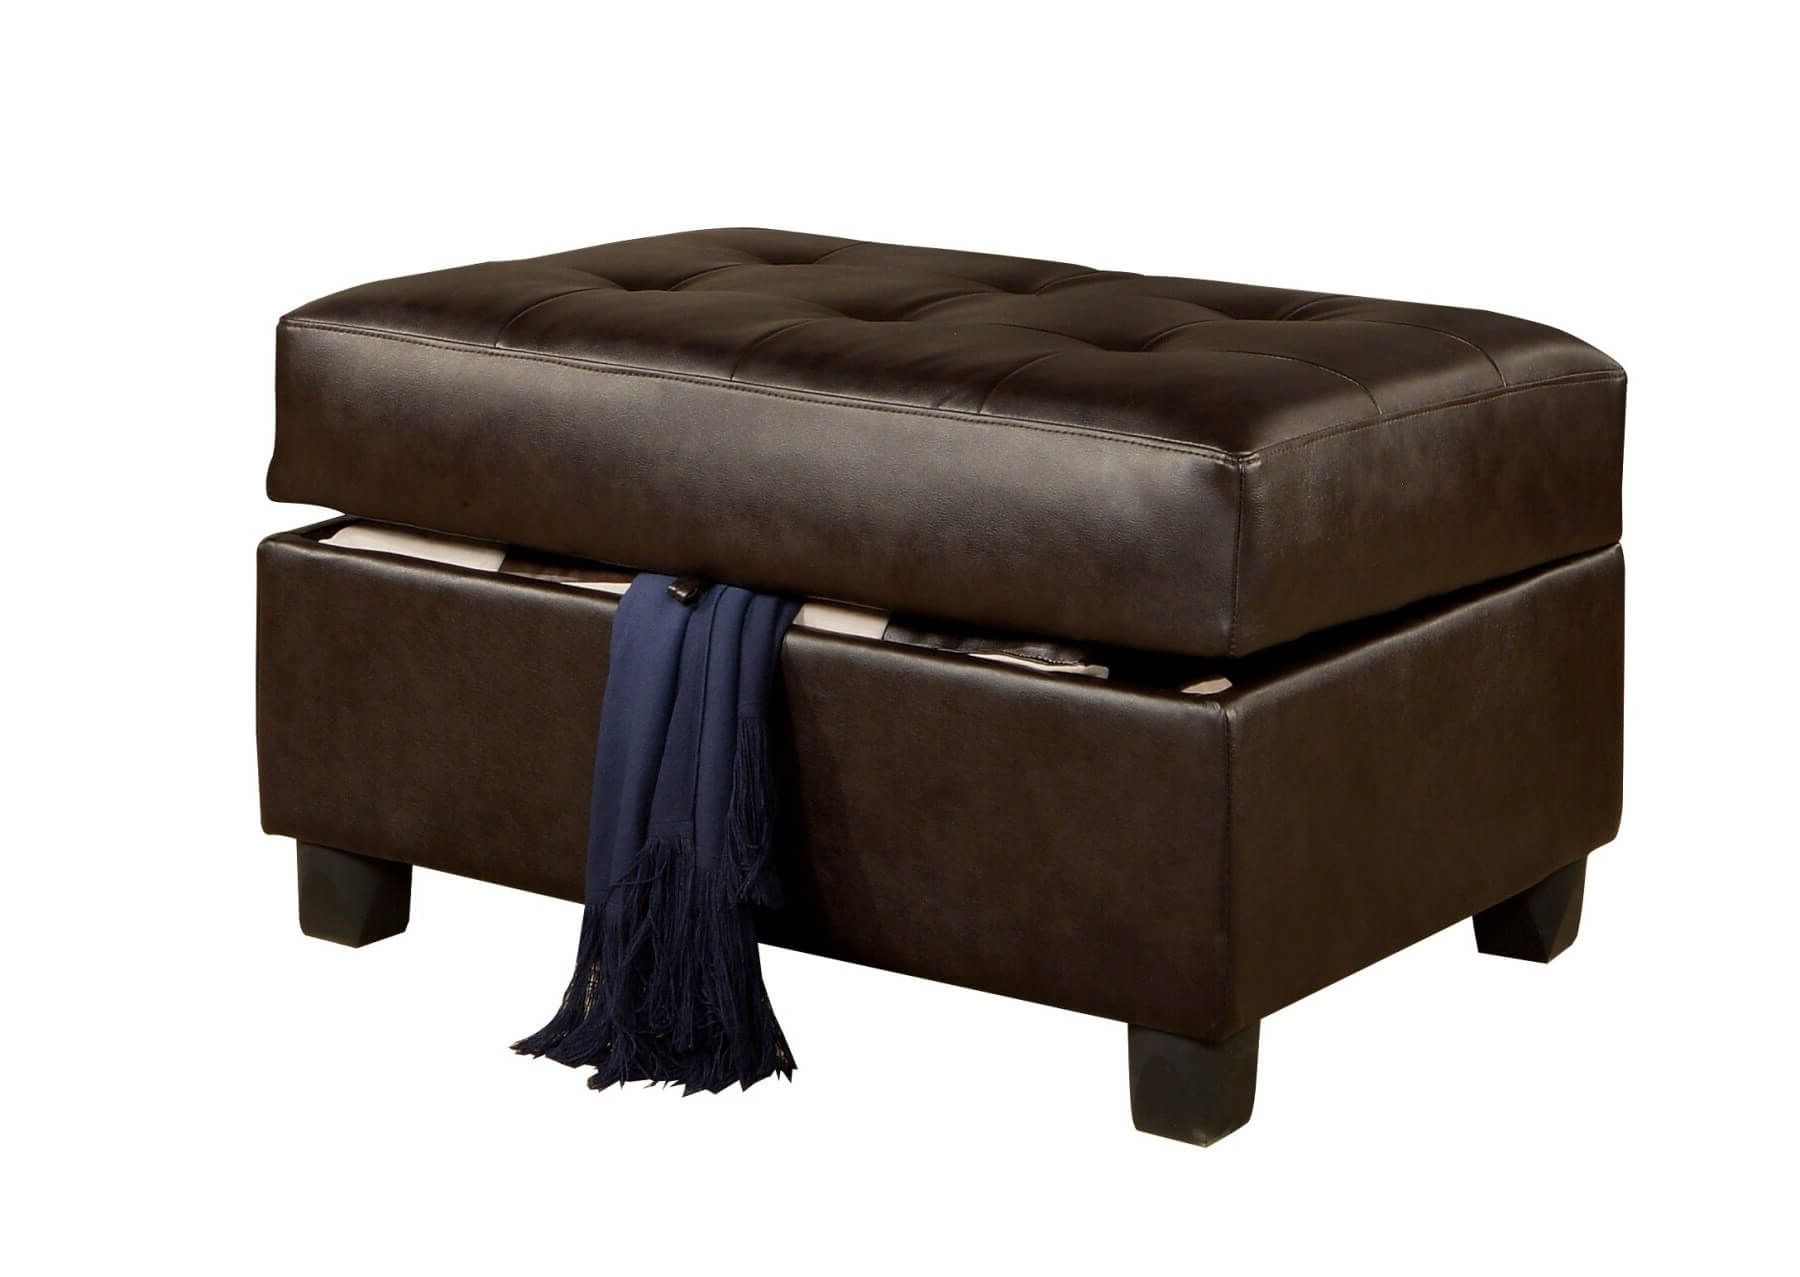 Trendy 36 Top Brown Leather Ottoman Coffee Tables Regarding Espresso Leather And Tan Canvas Pouf Ottomans (View 7 of 10)